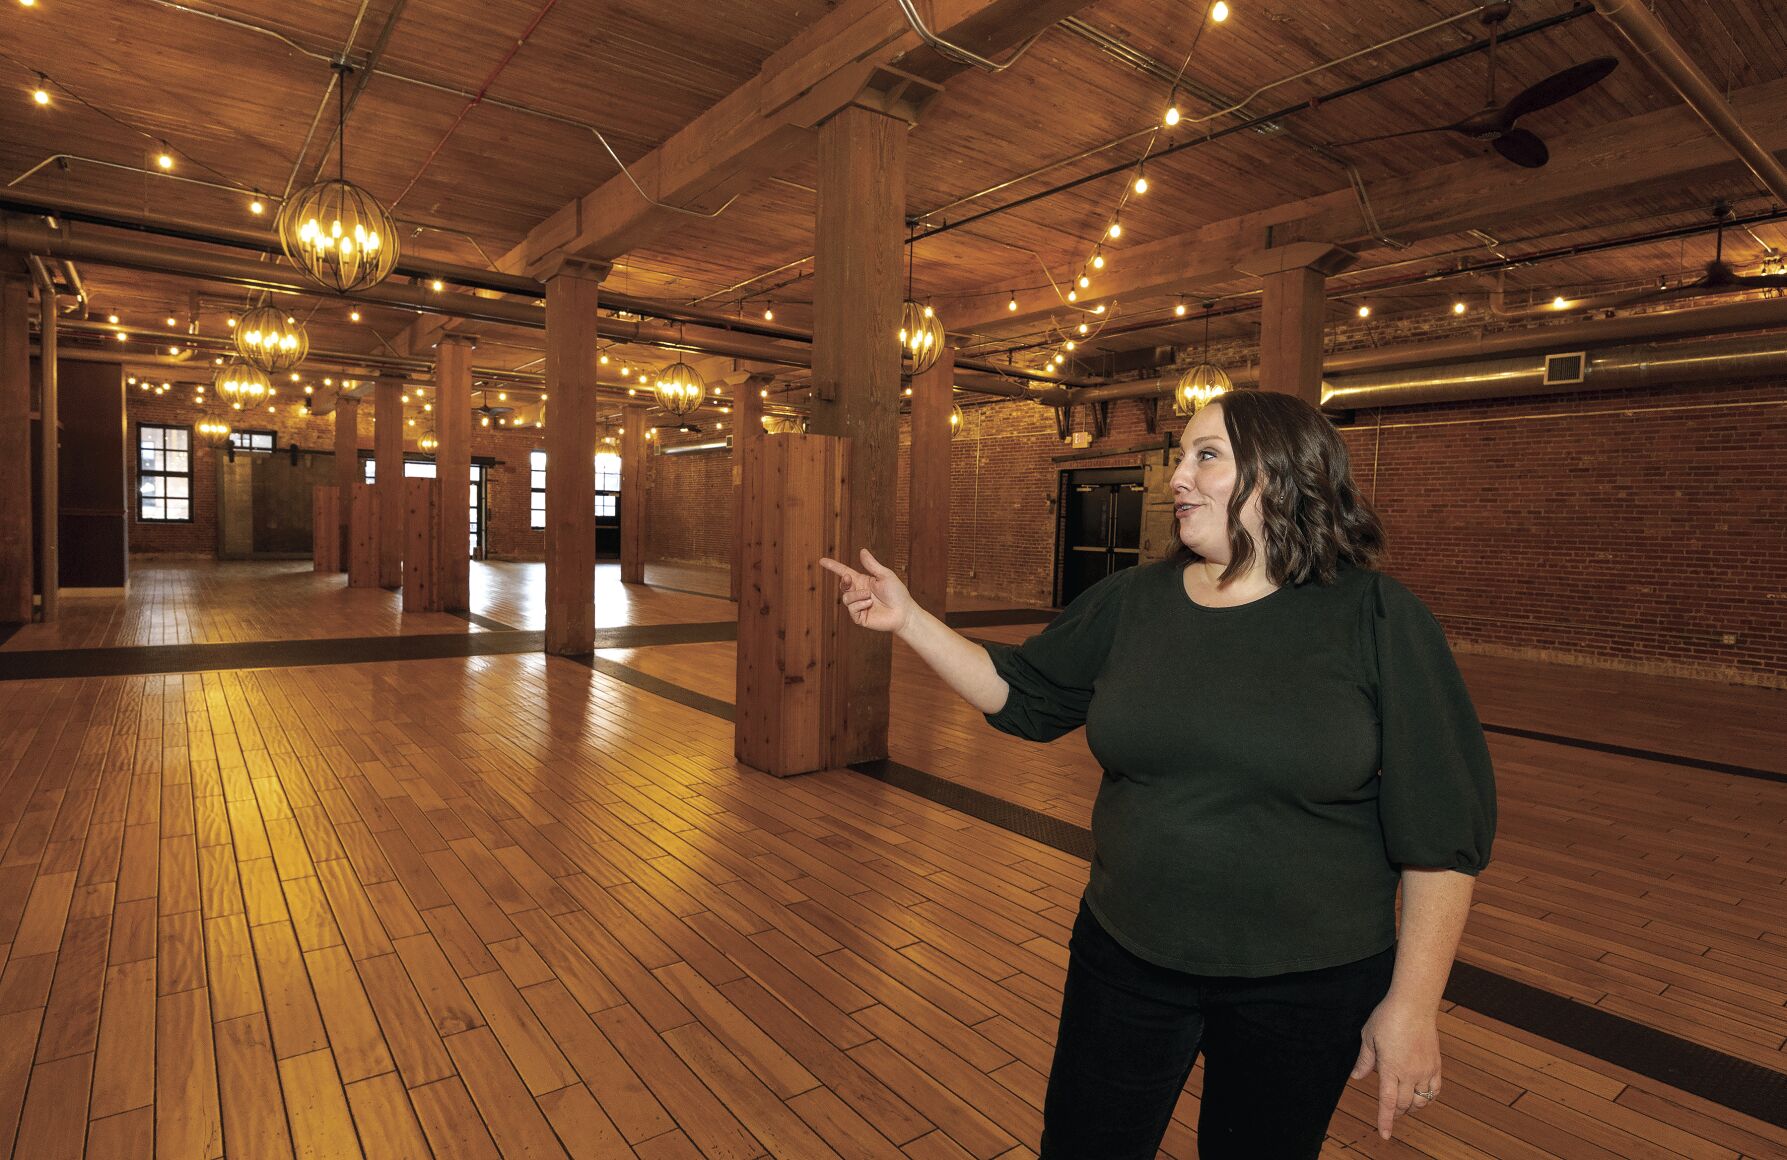 Kelly Hall, 7 Hills Brewing Company Director of Events, shows off the new event space Wednesday in Dubuque